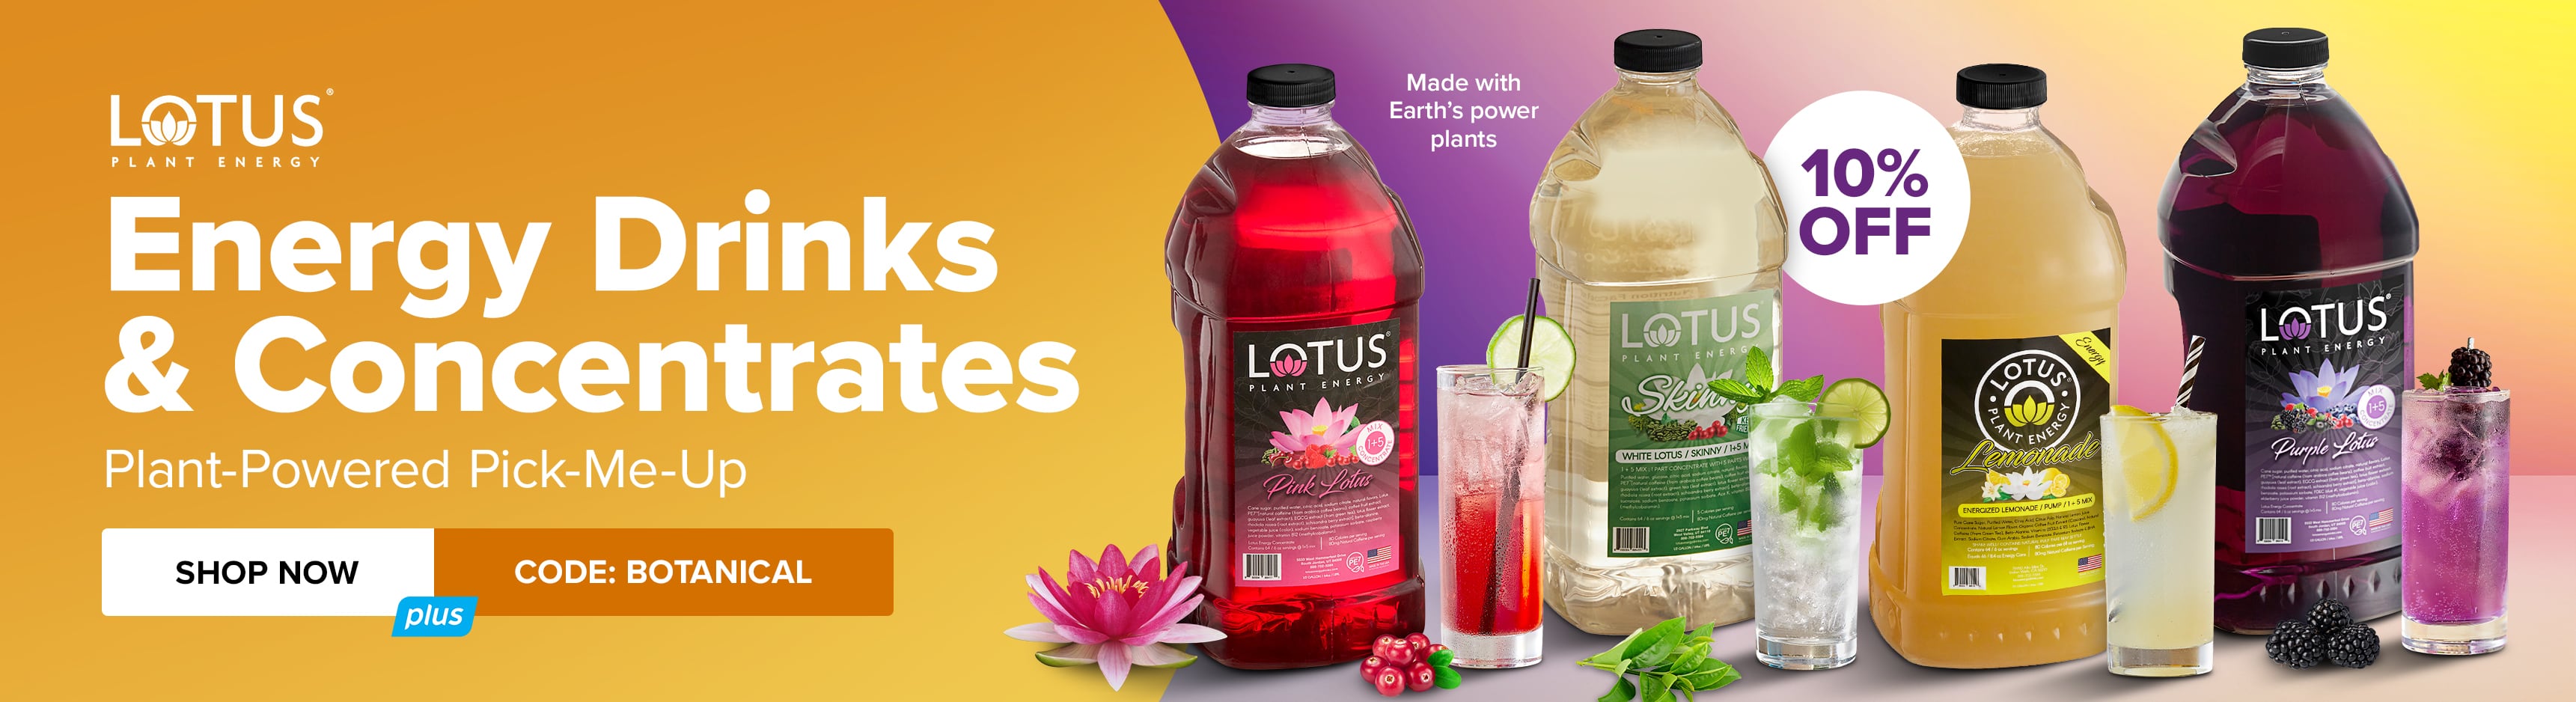 Lotus Plant Energy. Energy Drinks & Concentrates. Plant-Powered Pick-Me-Up. Shop Now. Use Code: BOTANICAL. Save 10% Now.